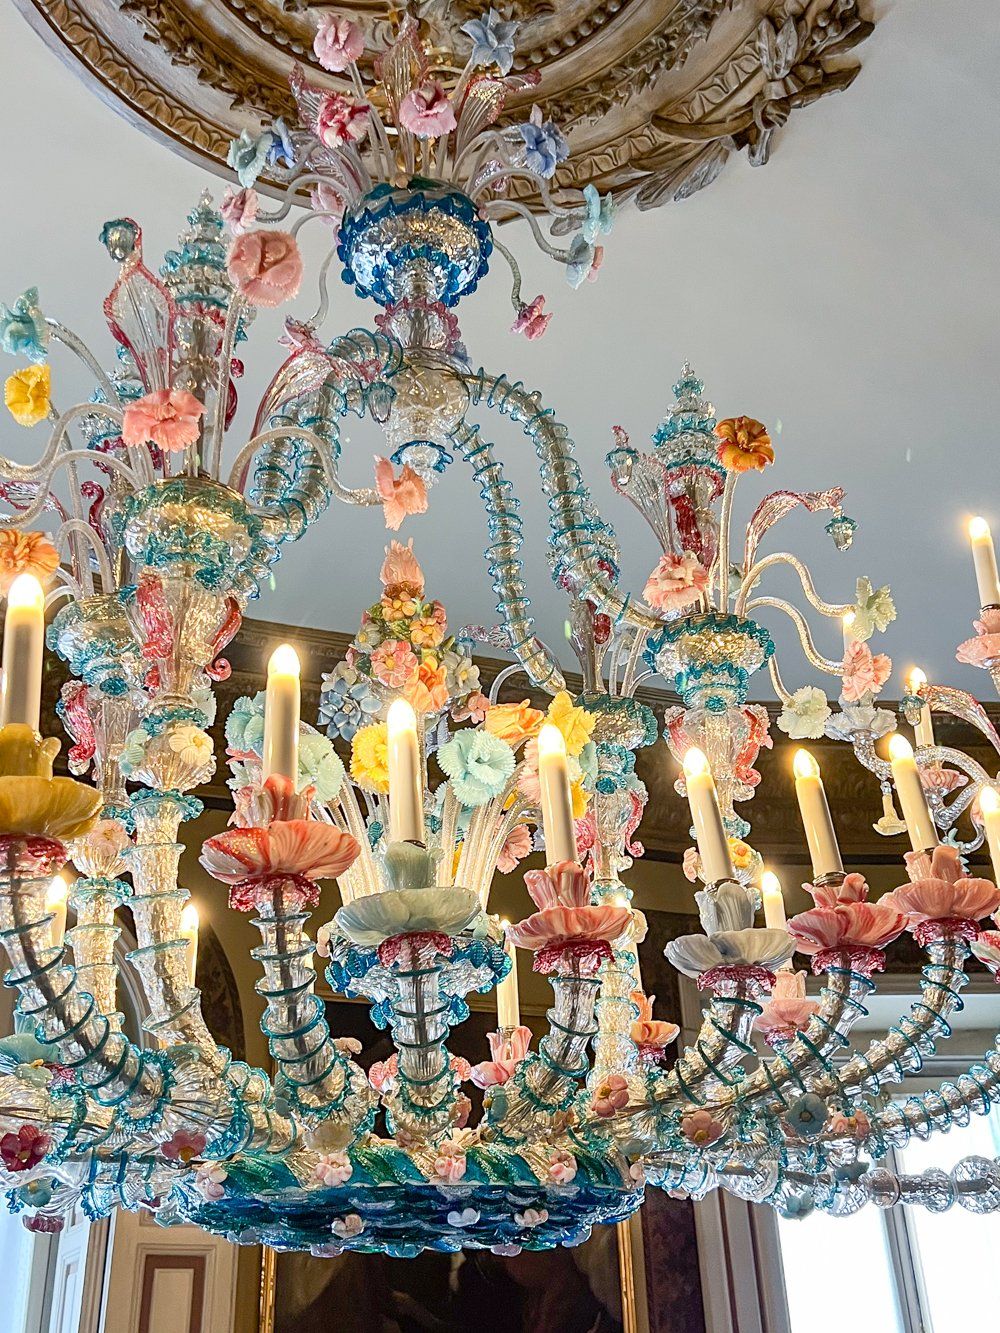 Murano Chandelier at the Museo Cerralbo